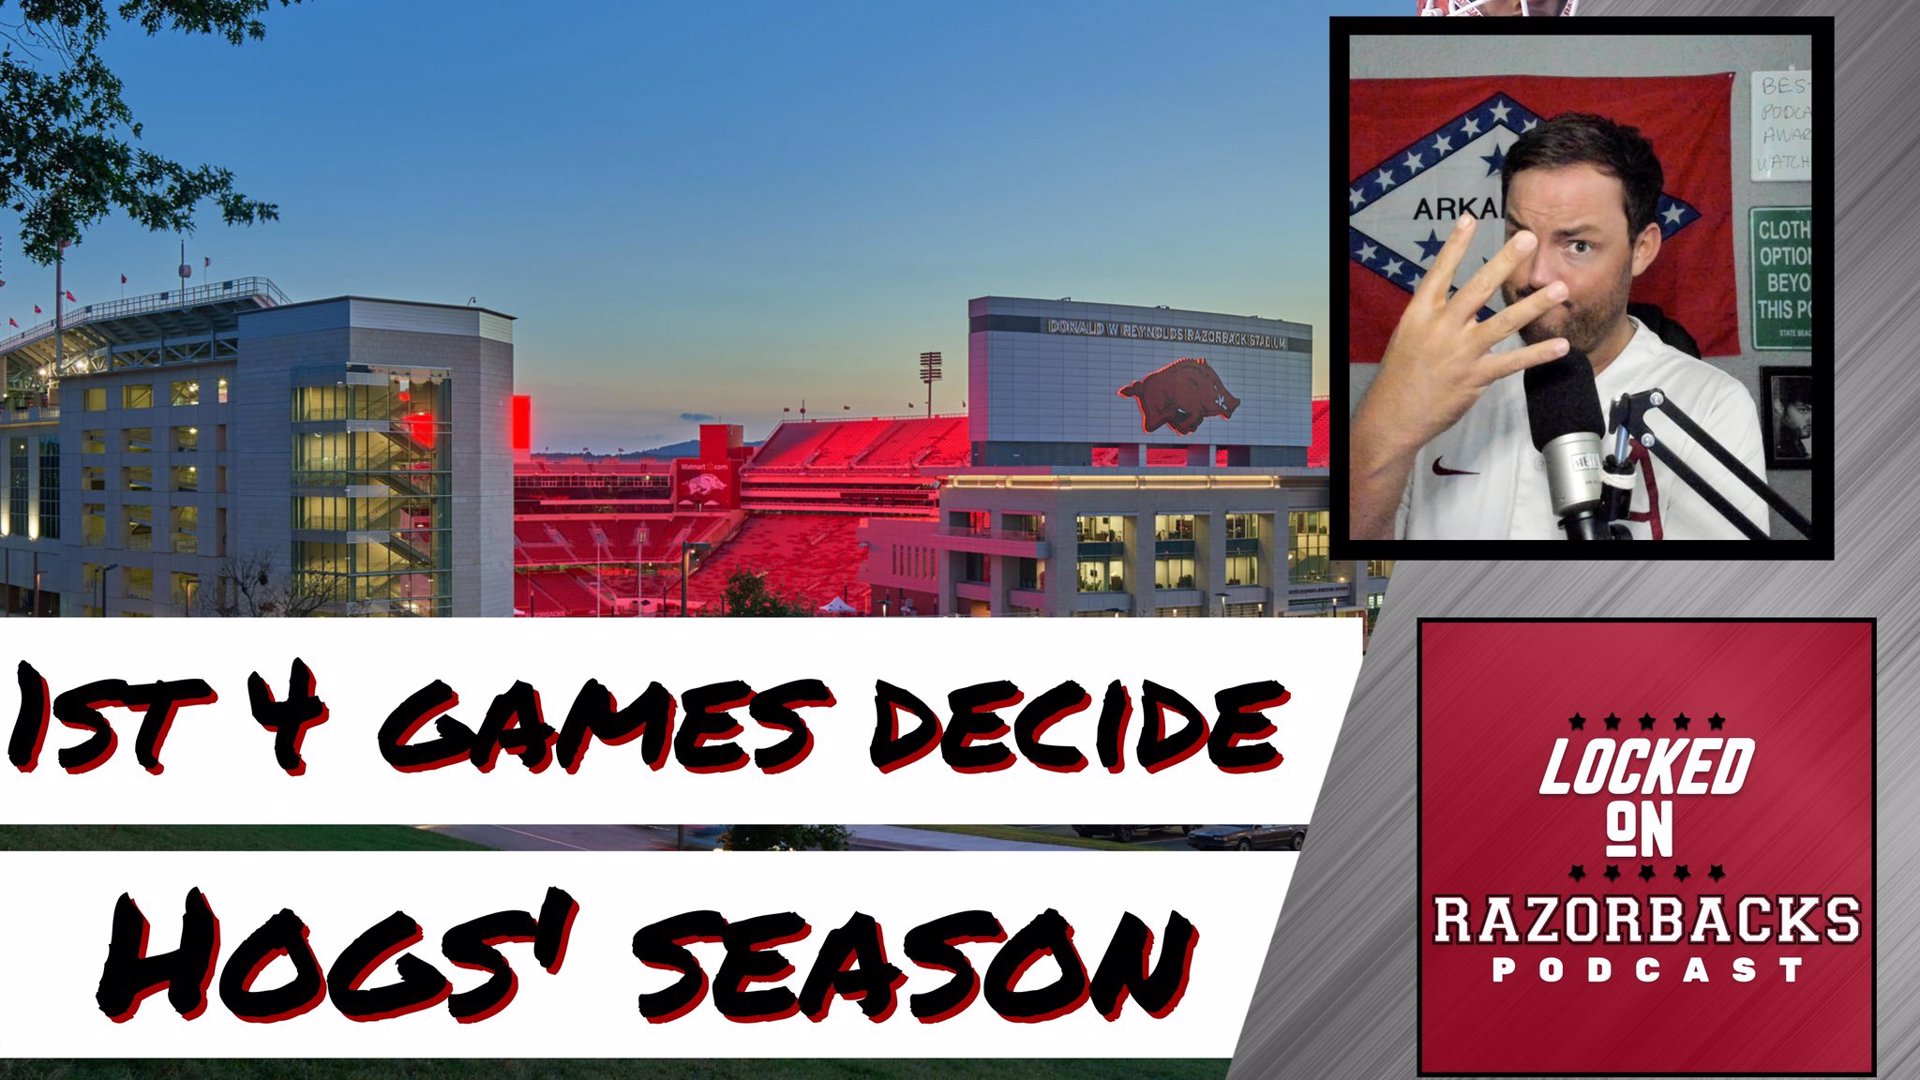 John Nabors dives into the 2022 Razorback Football schedule from beginning to end, how the 1st four games of the year will determine their success.